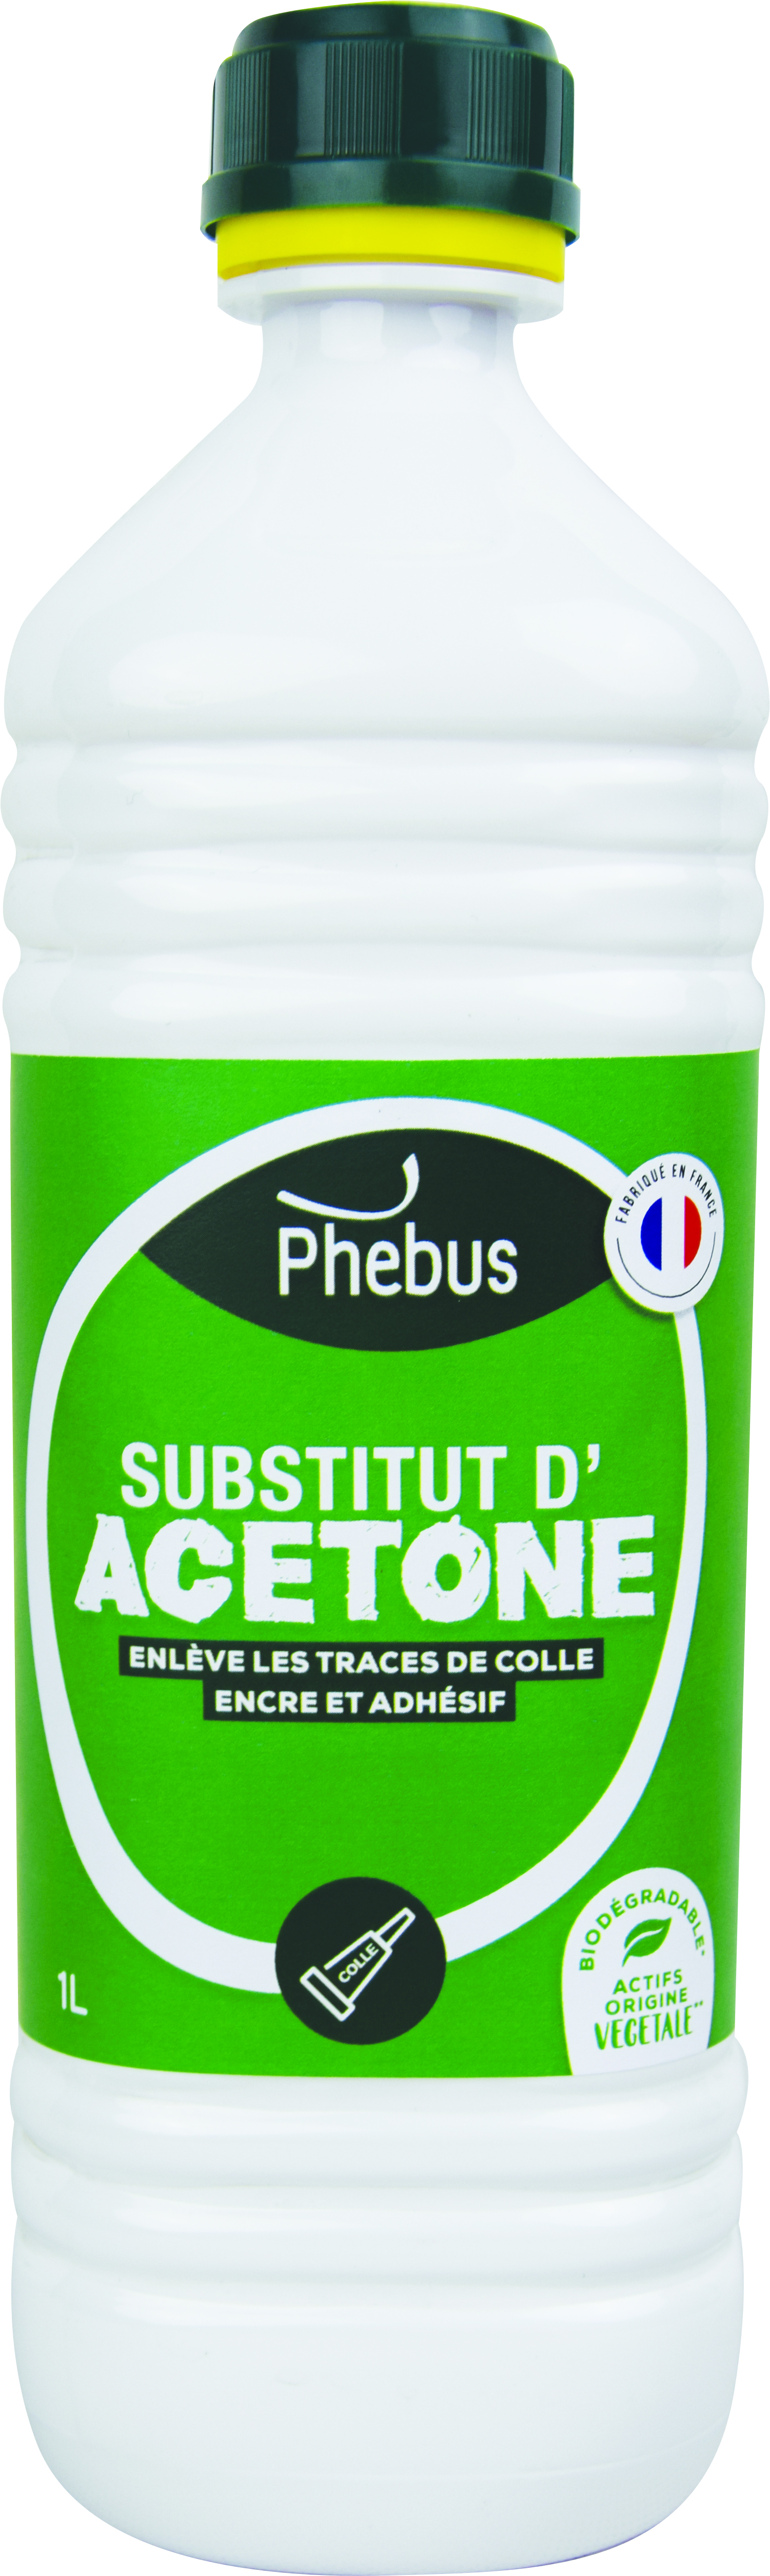 Substitut Acetone Gamme Rse